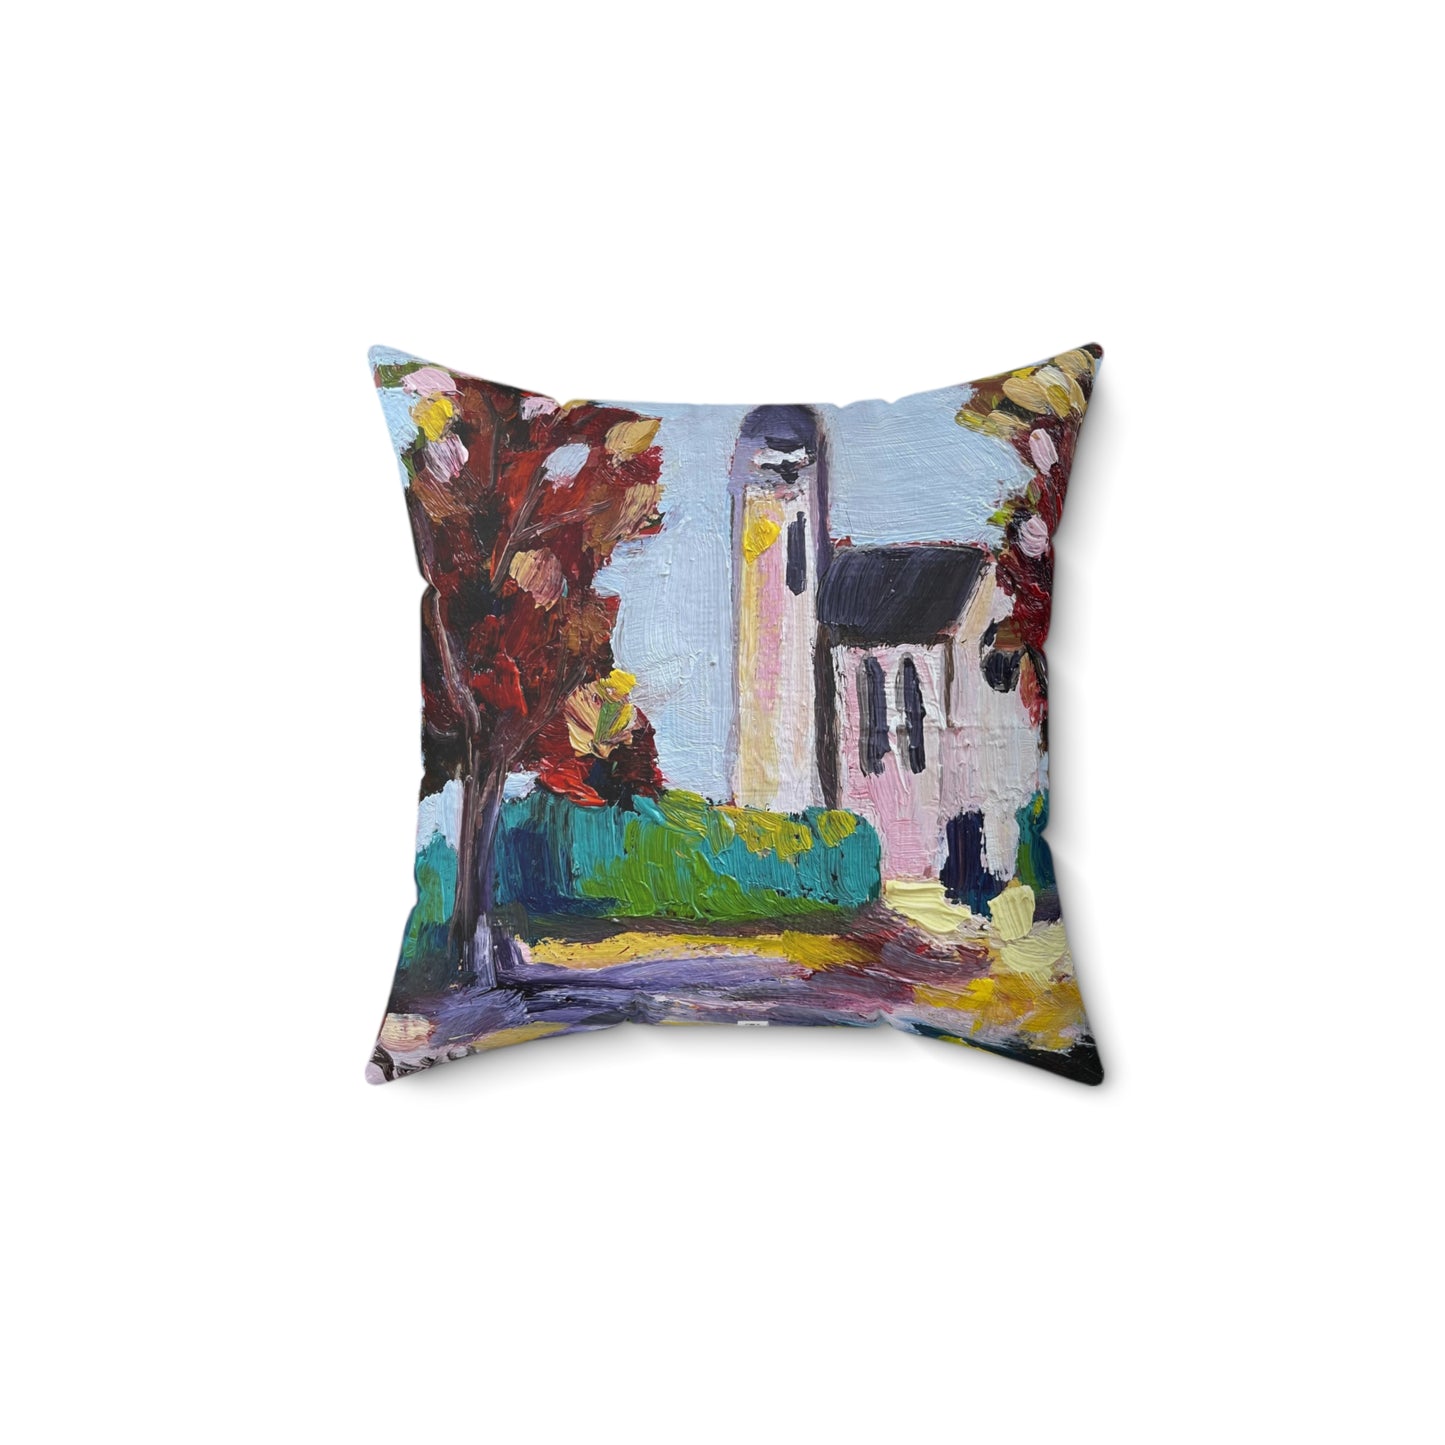 Church in a Field Indoor Spun Polyester Square Pillow